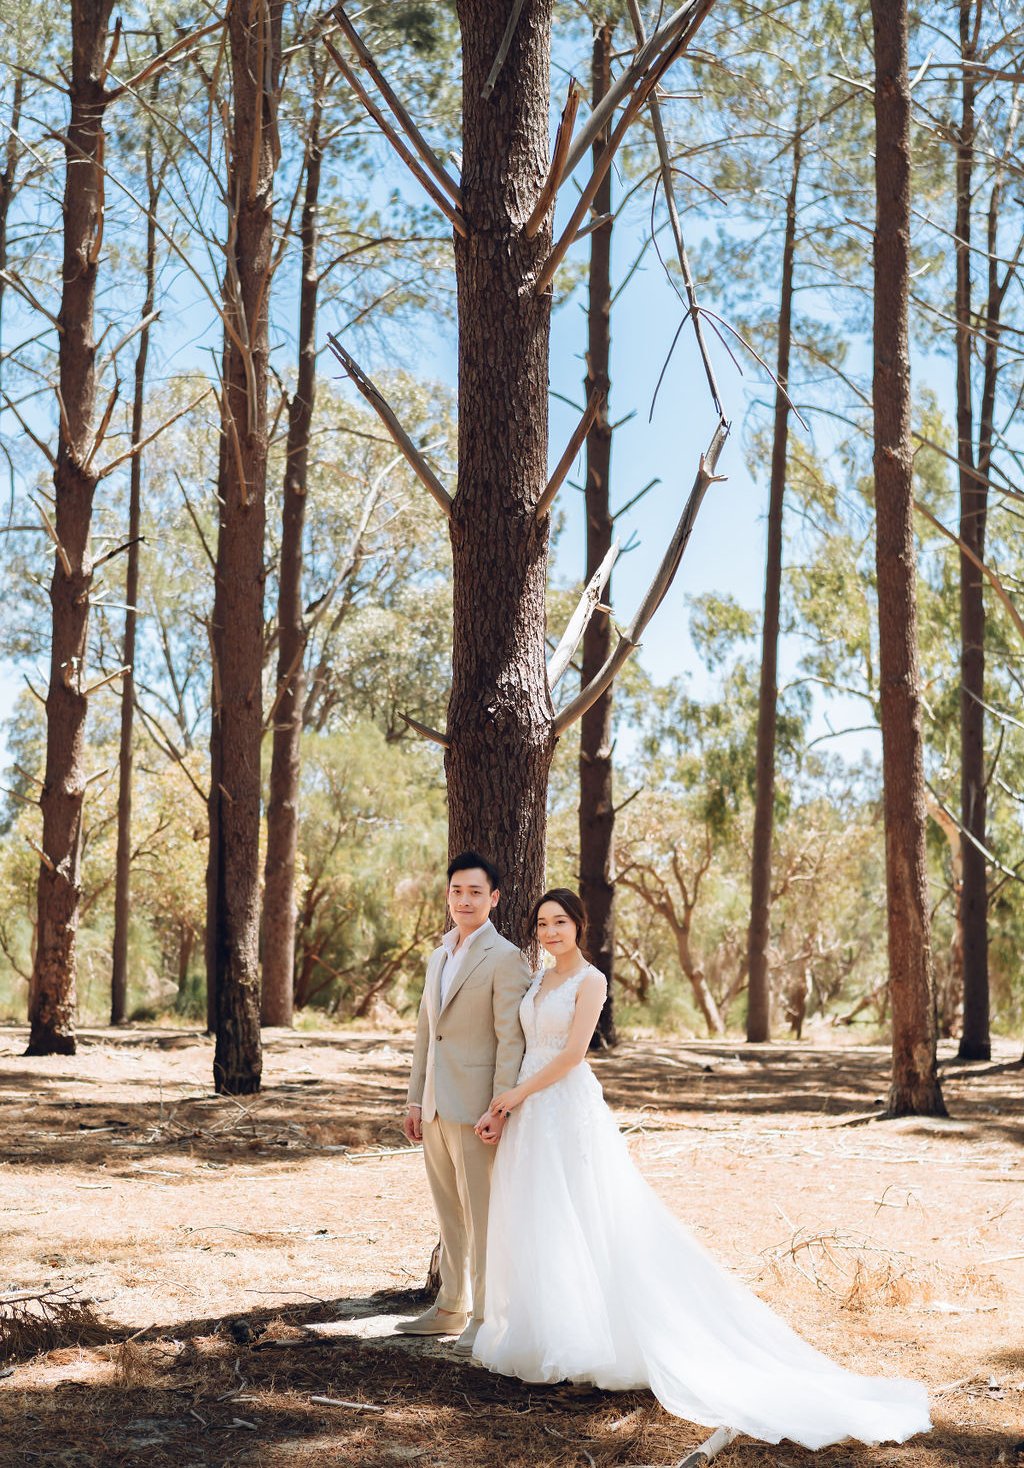 Perth Prewedding Photoshoot At Lancelin Sand Dunes, Wanneroo Pines And Sunset At The Beach